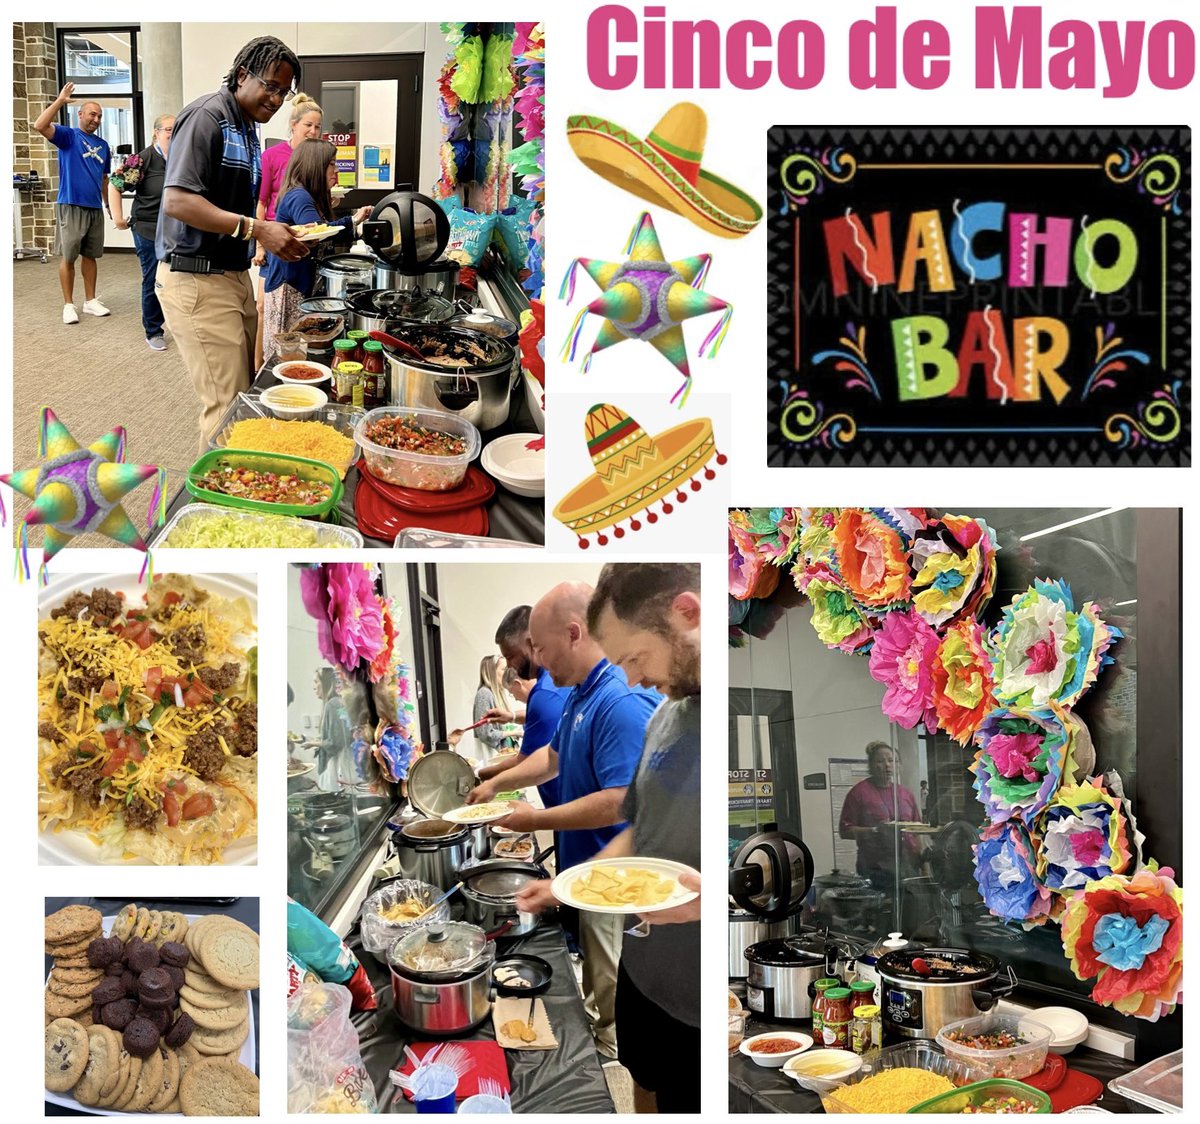 🪅Nacho Bar FIESTA!🪅 Our SpEd Dept. provided lunch today! Celebrating Cinco de Mayo @HPetersonMS & feeling festive🪅 #hpmsFAMILY #hpmsBEST #KISDinspires #CincoDeMayo